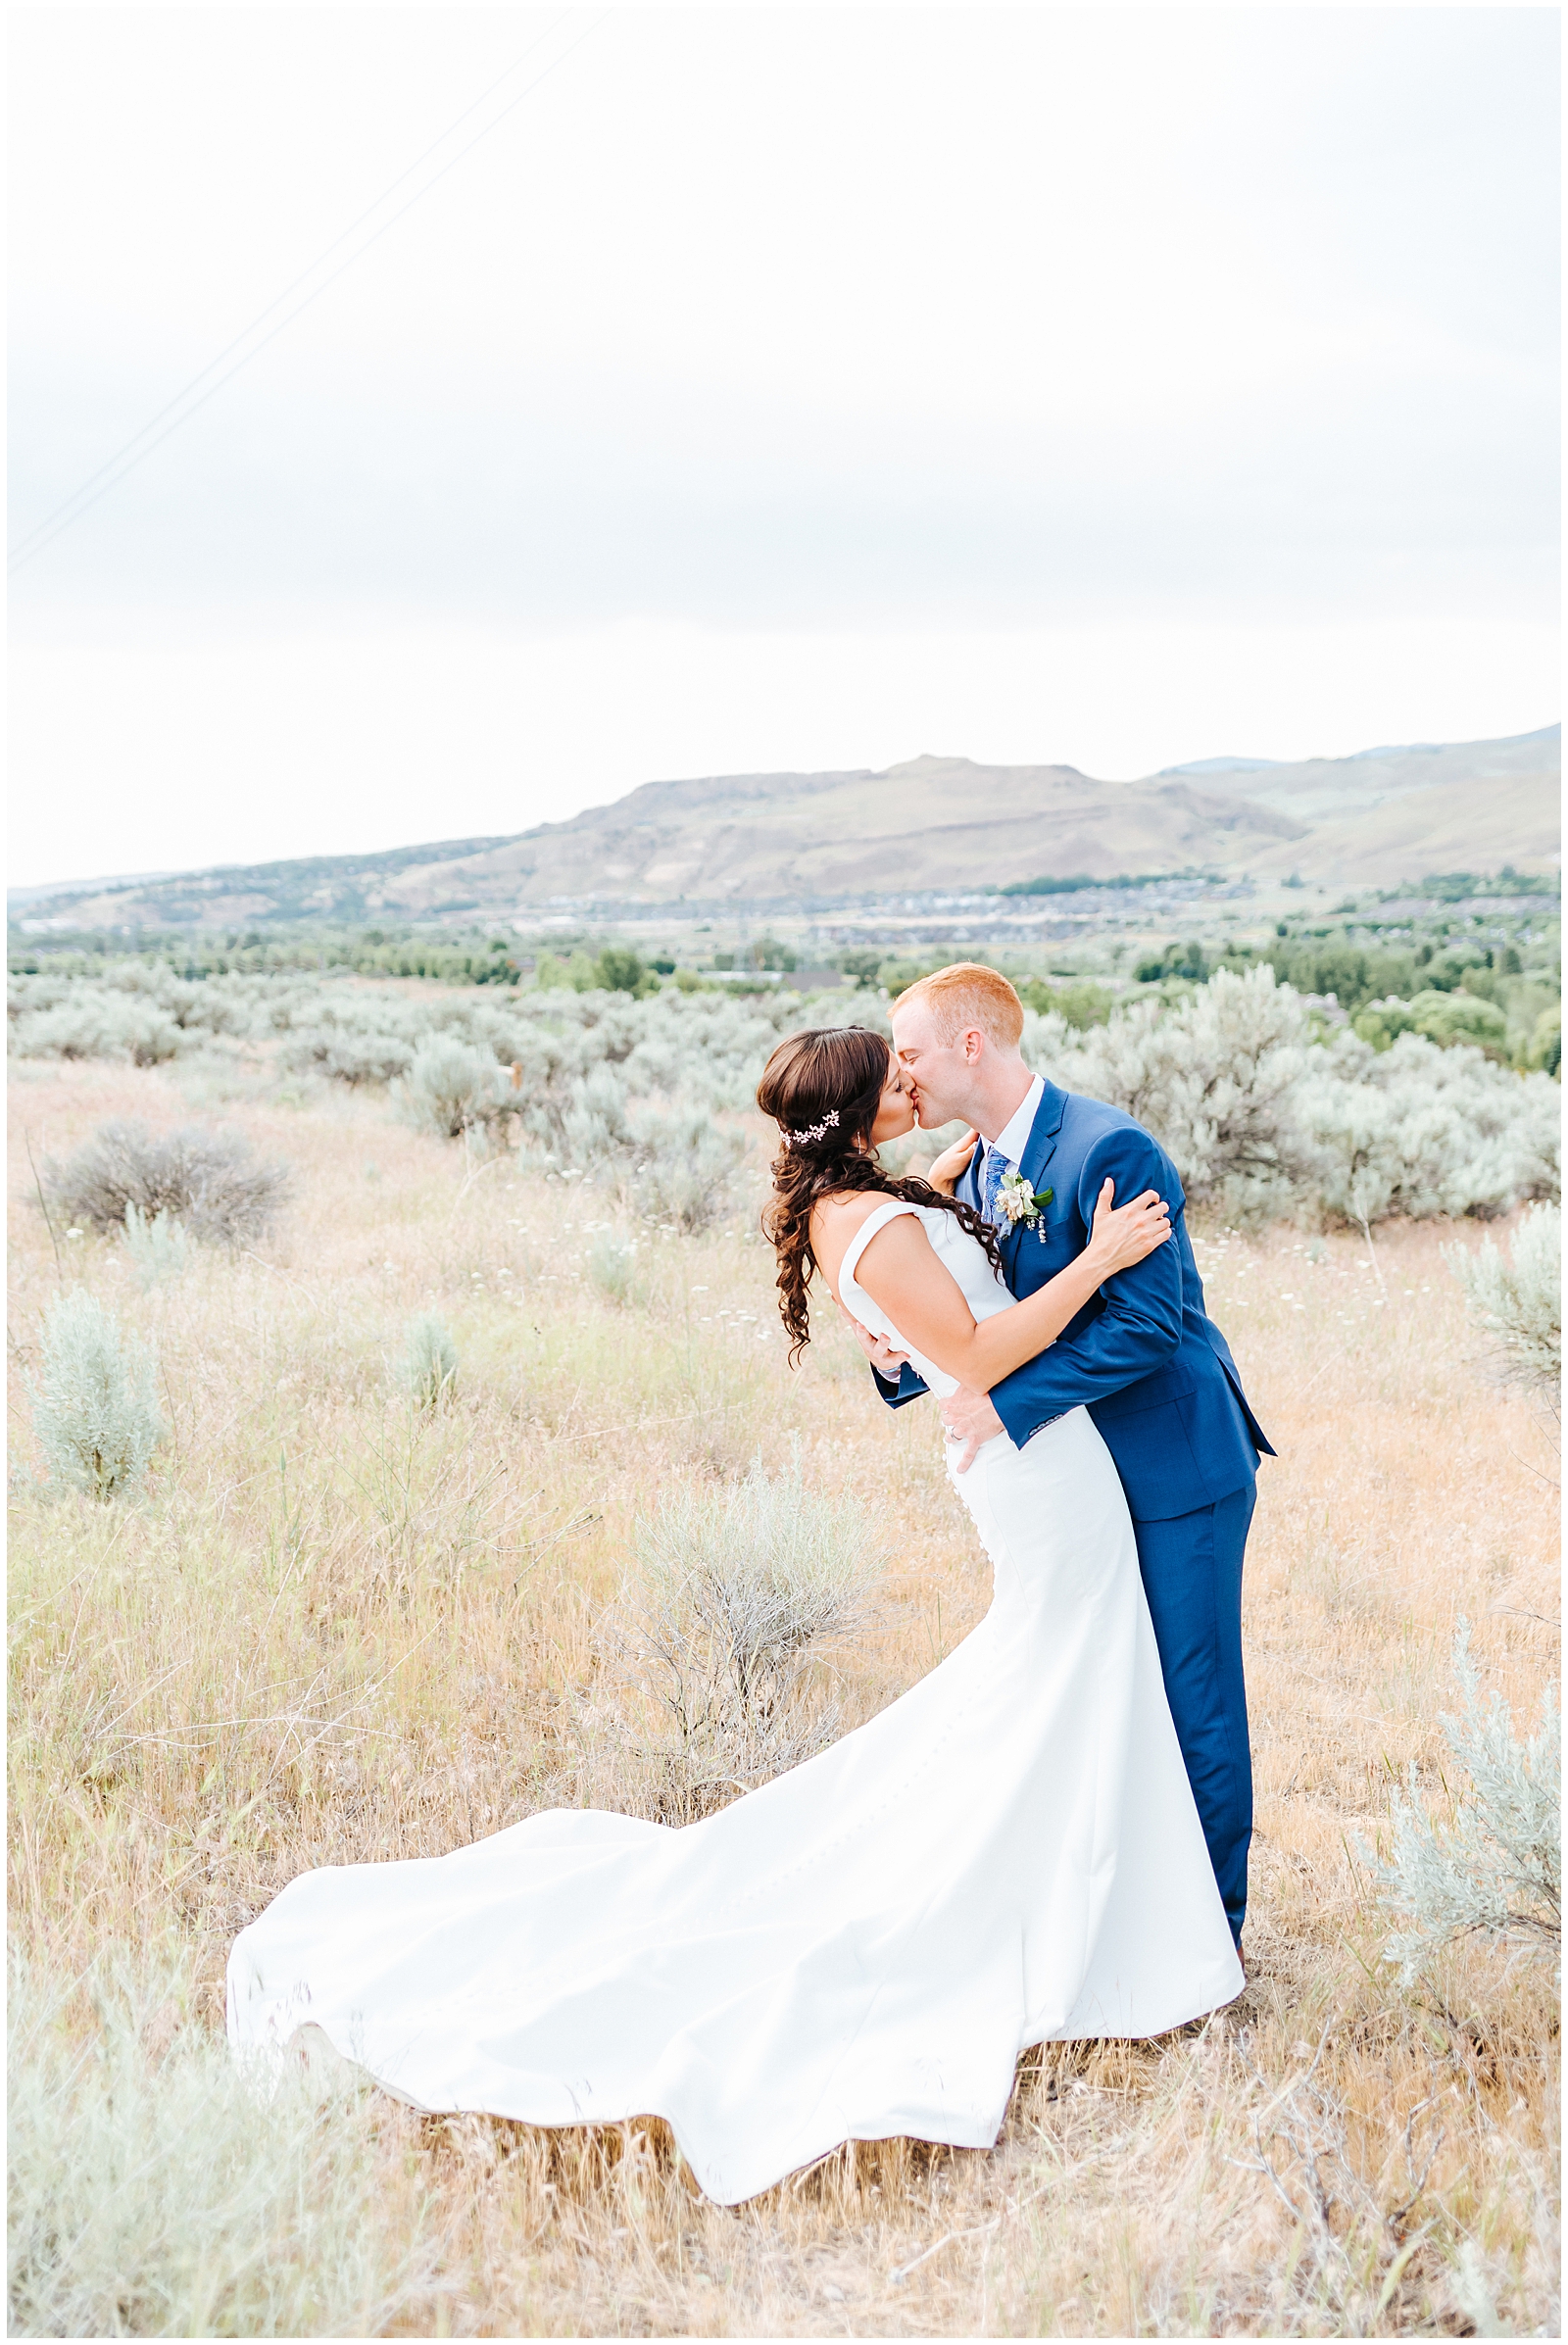 Boise Foothills Wedding with Classic Satin Dress and Navy Suit